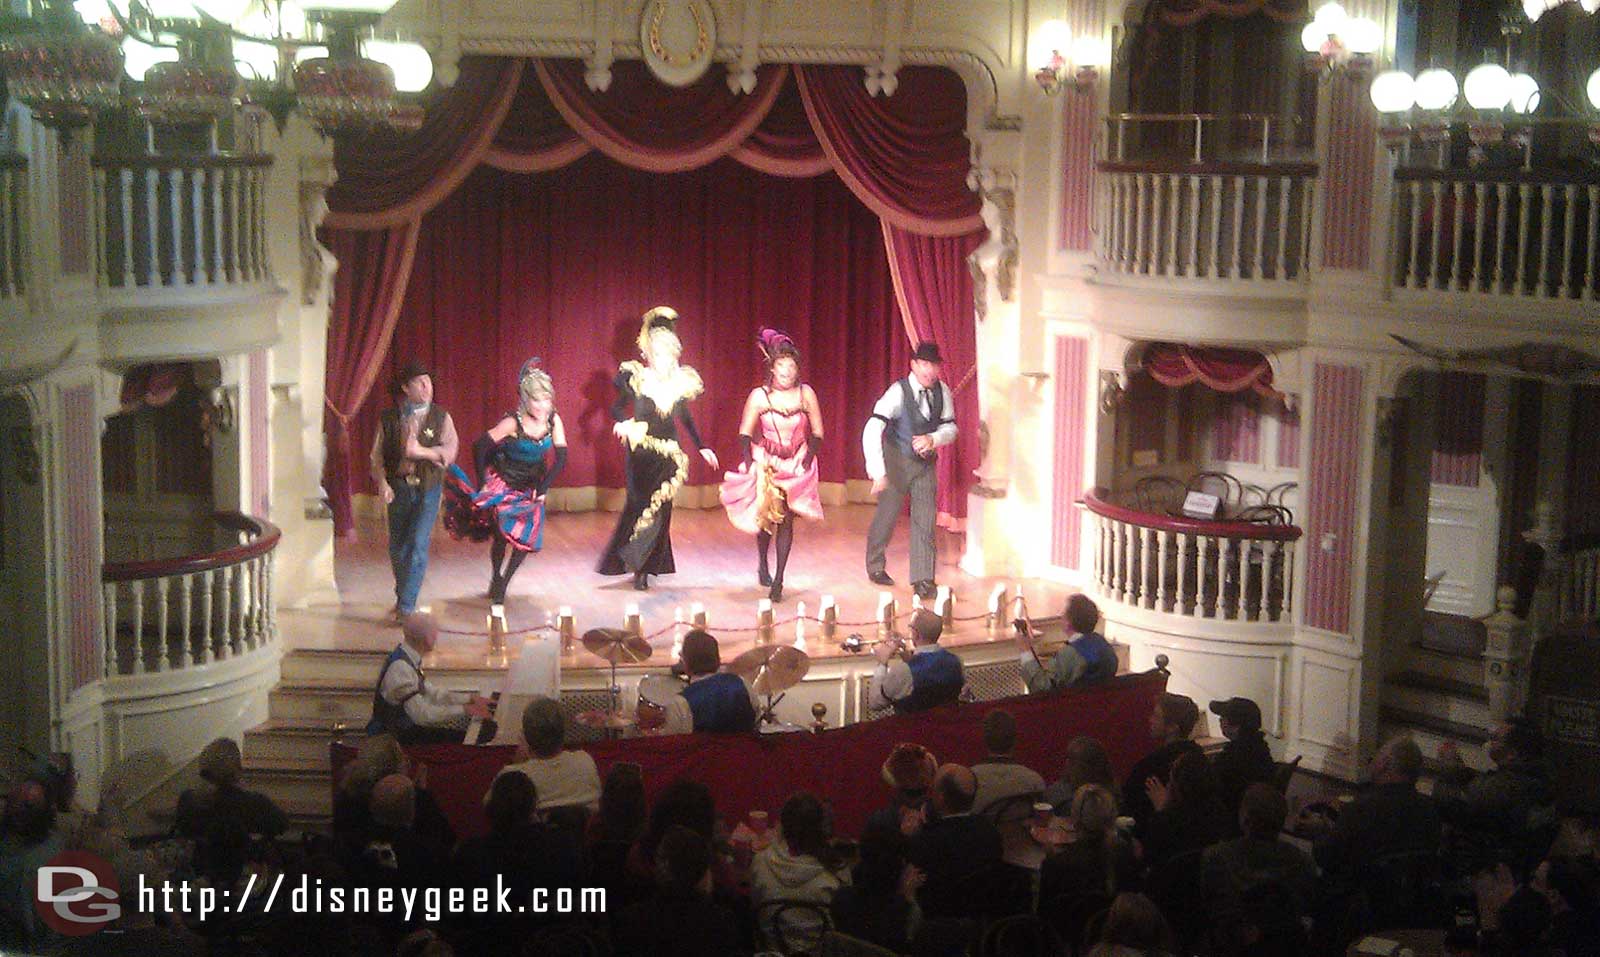 One more Golden Horseshoe Picture better pics and videos in tomorrows update.